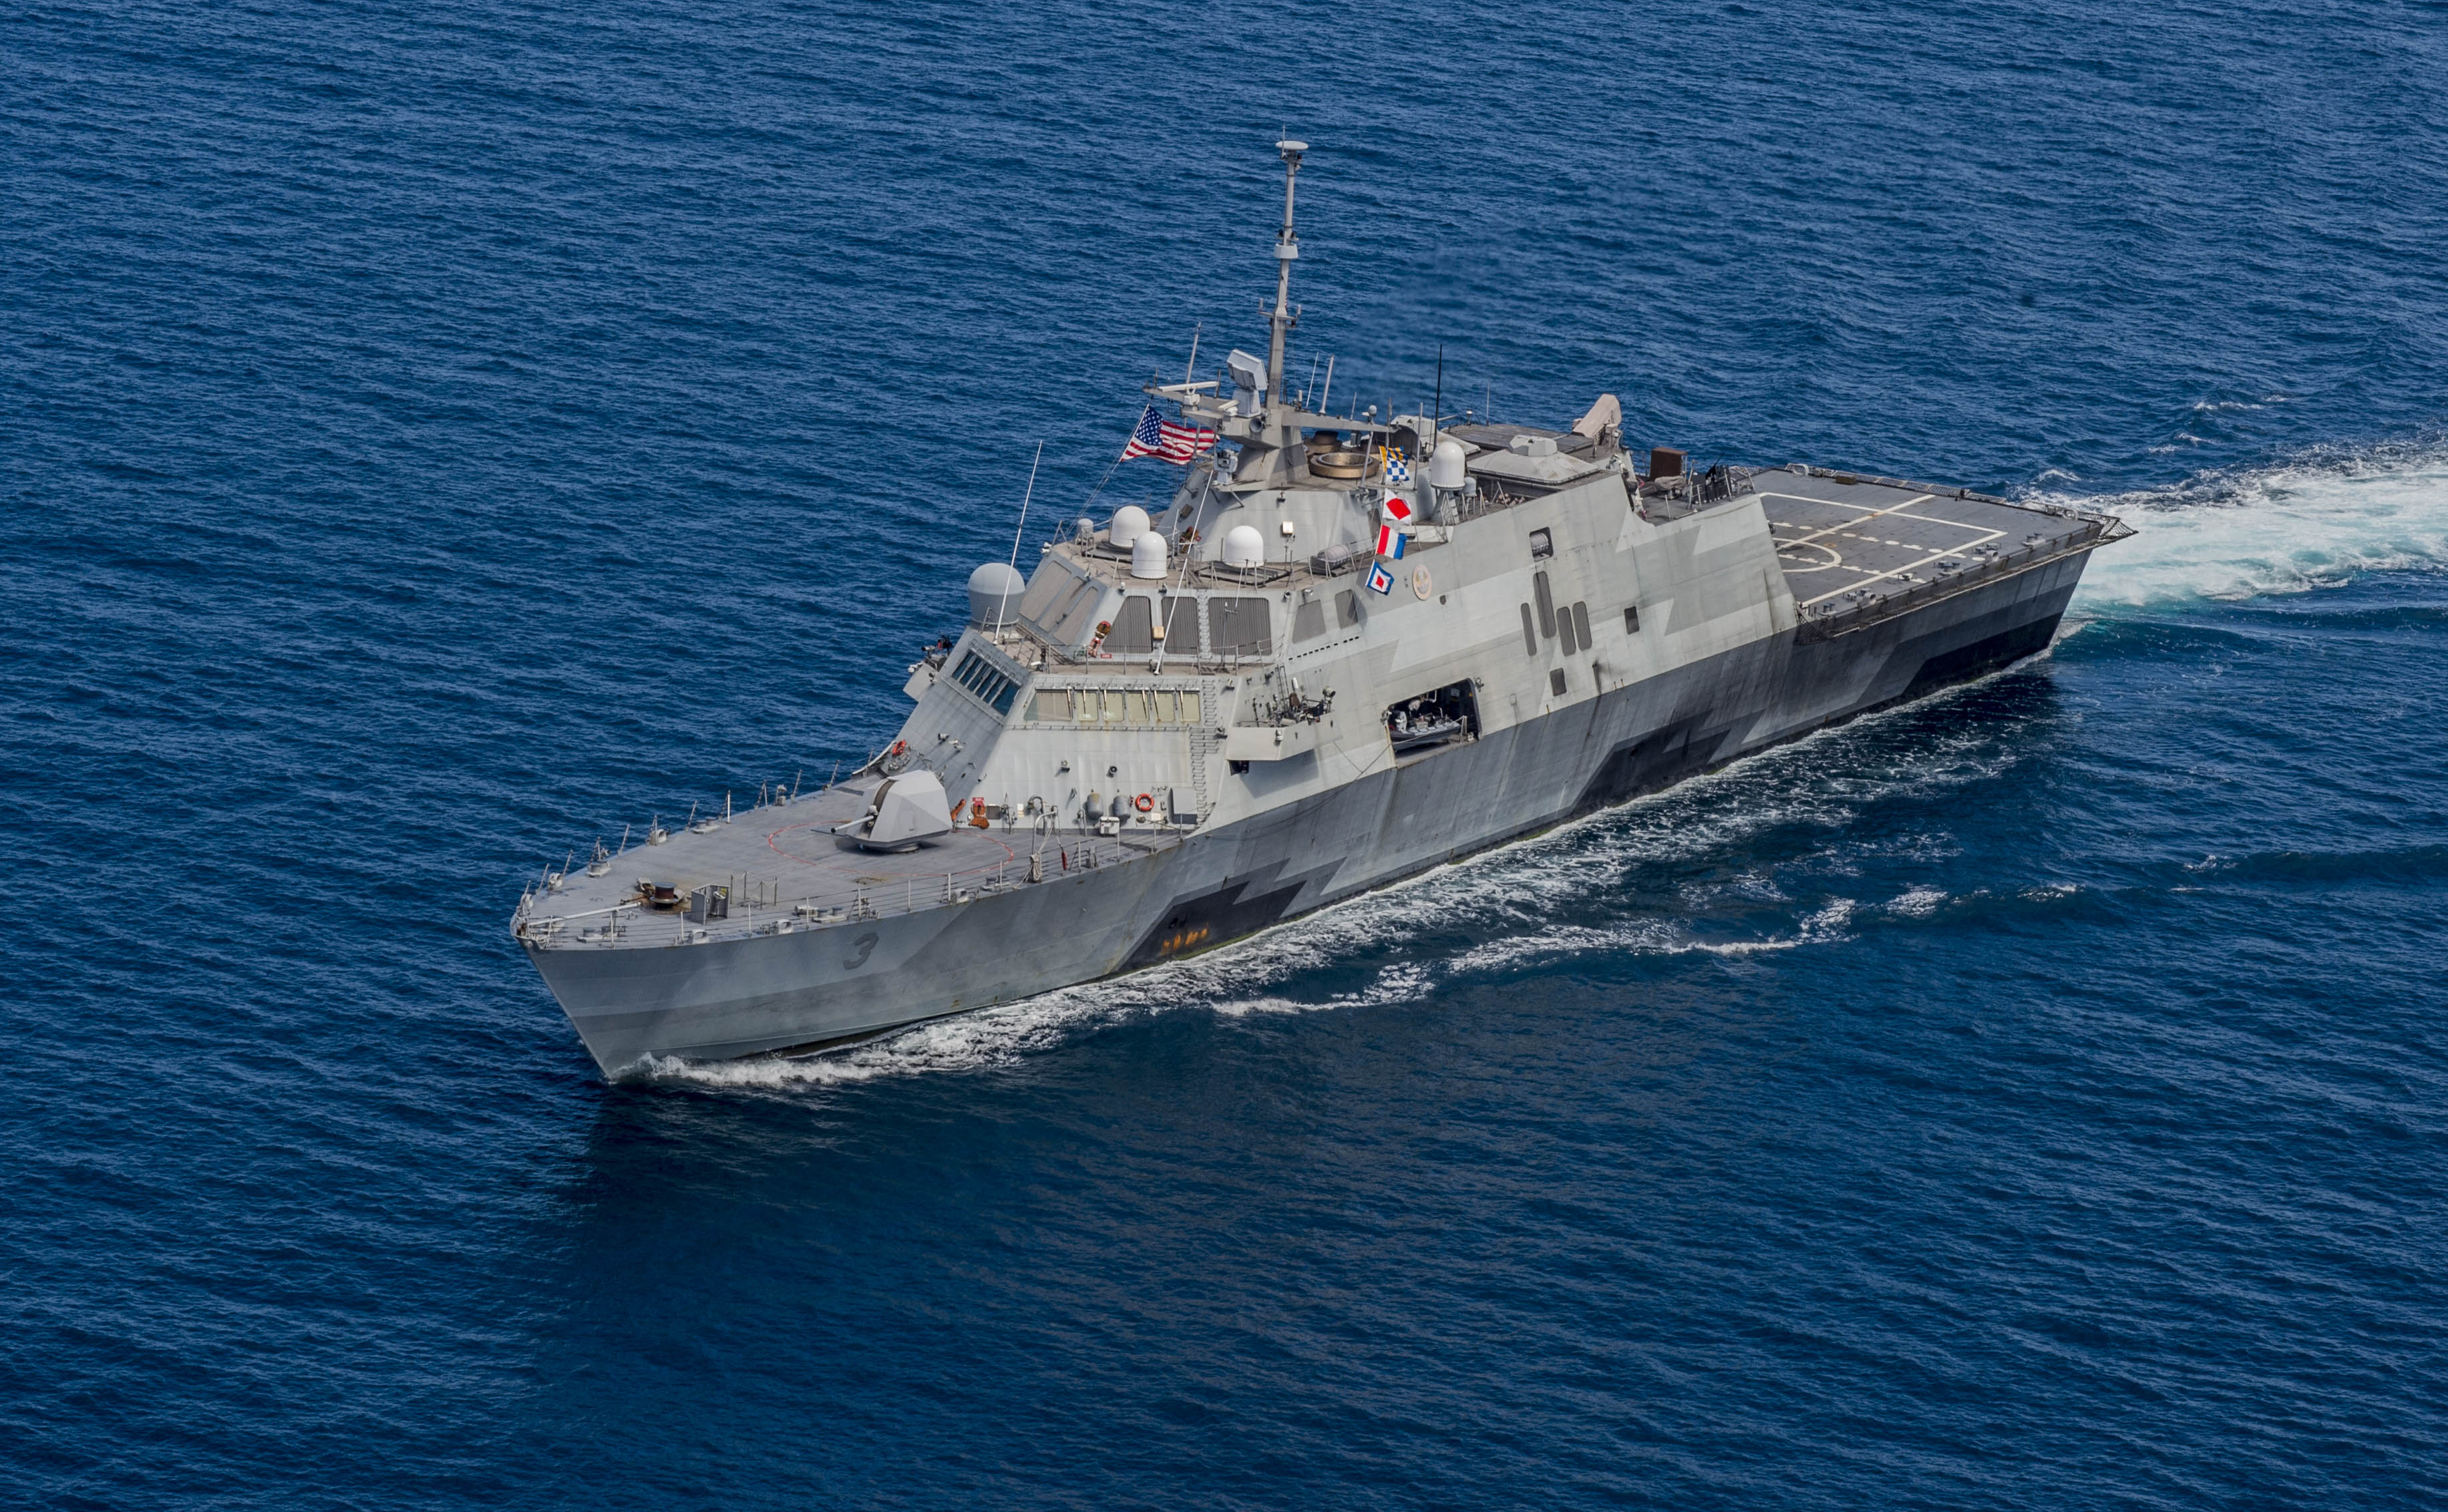 USS Fort Worth (LCS 3) transits in formation with ships from the Royal Malaysian navy as part of Cooperation Afloat Readiness and Training (CARAT) Malaysia 2015 on Aug. 19, 2015. US Navy Photo